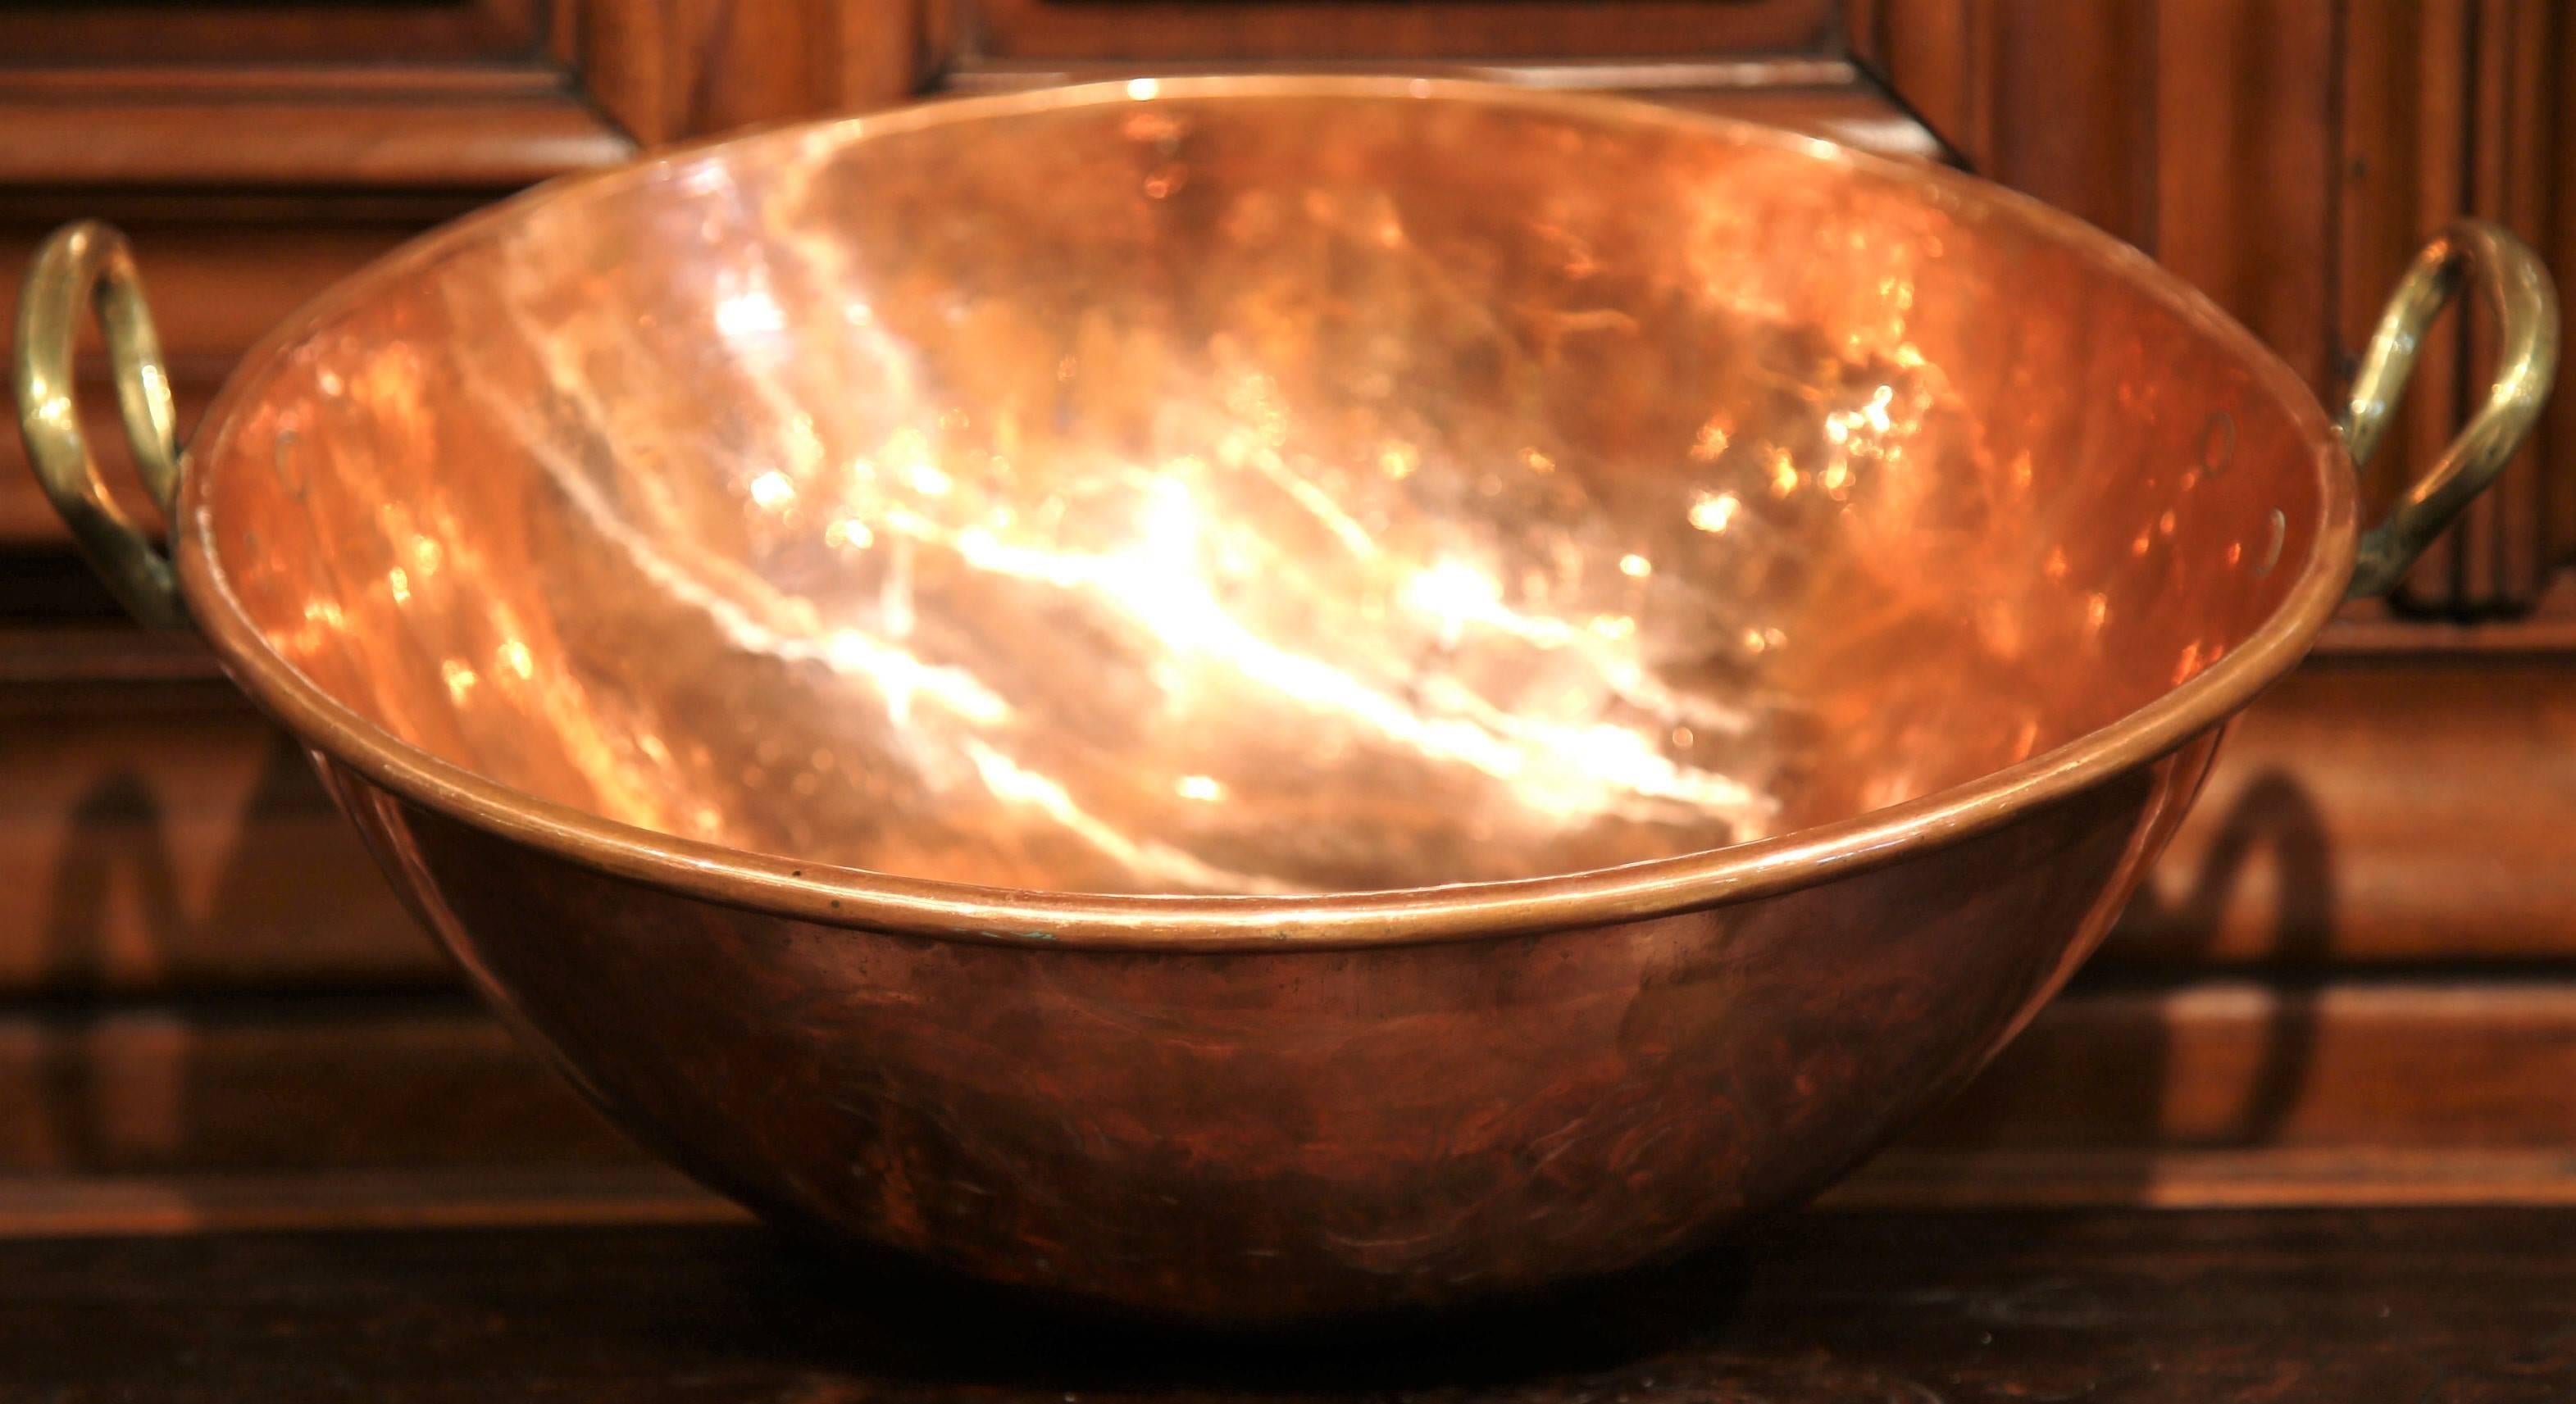 Cool wine and champagne or display fruit in this rounded copper dish from France, circa 1870. Originally used to make jelly marmalade, the classic metal serving bowl features a pair of handles on either side and has been polished inside and out. The